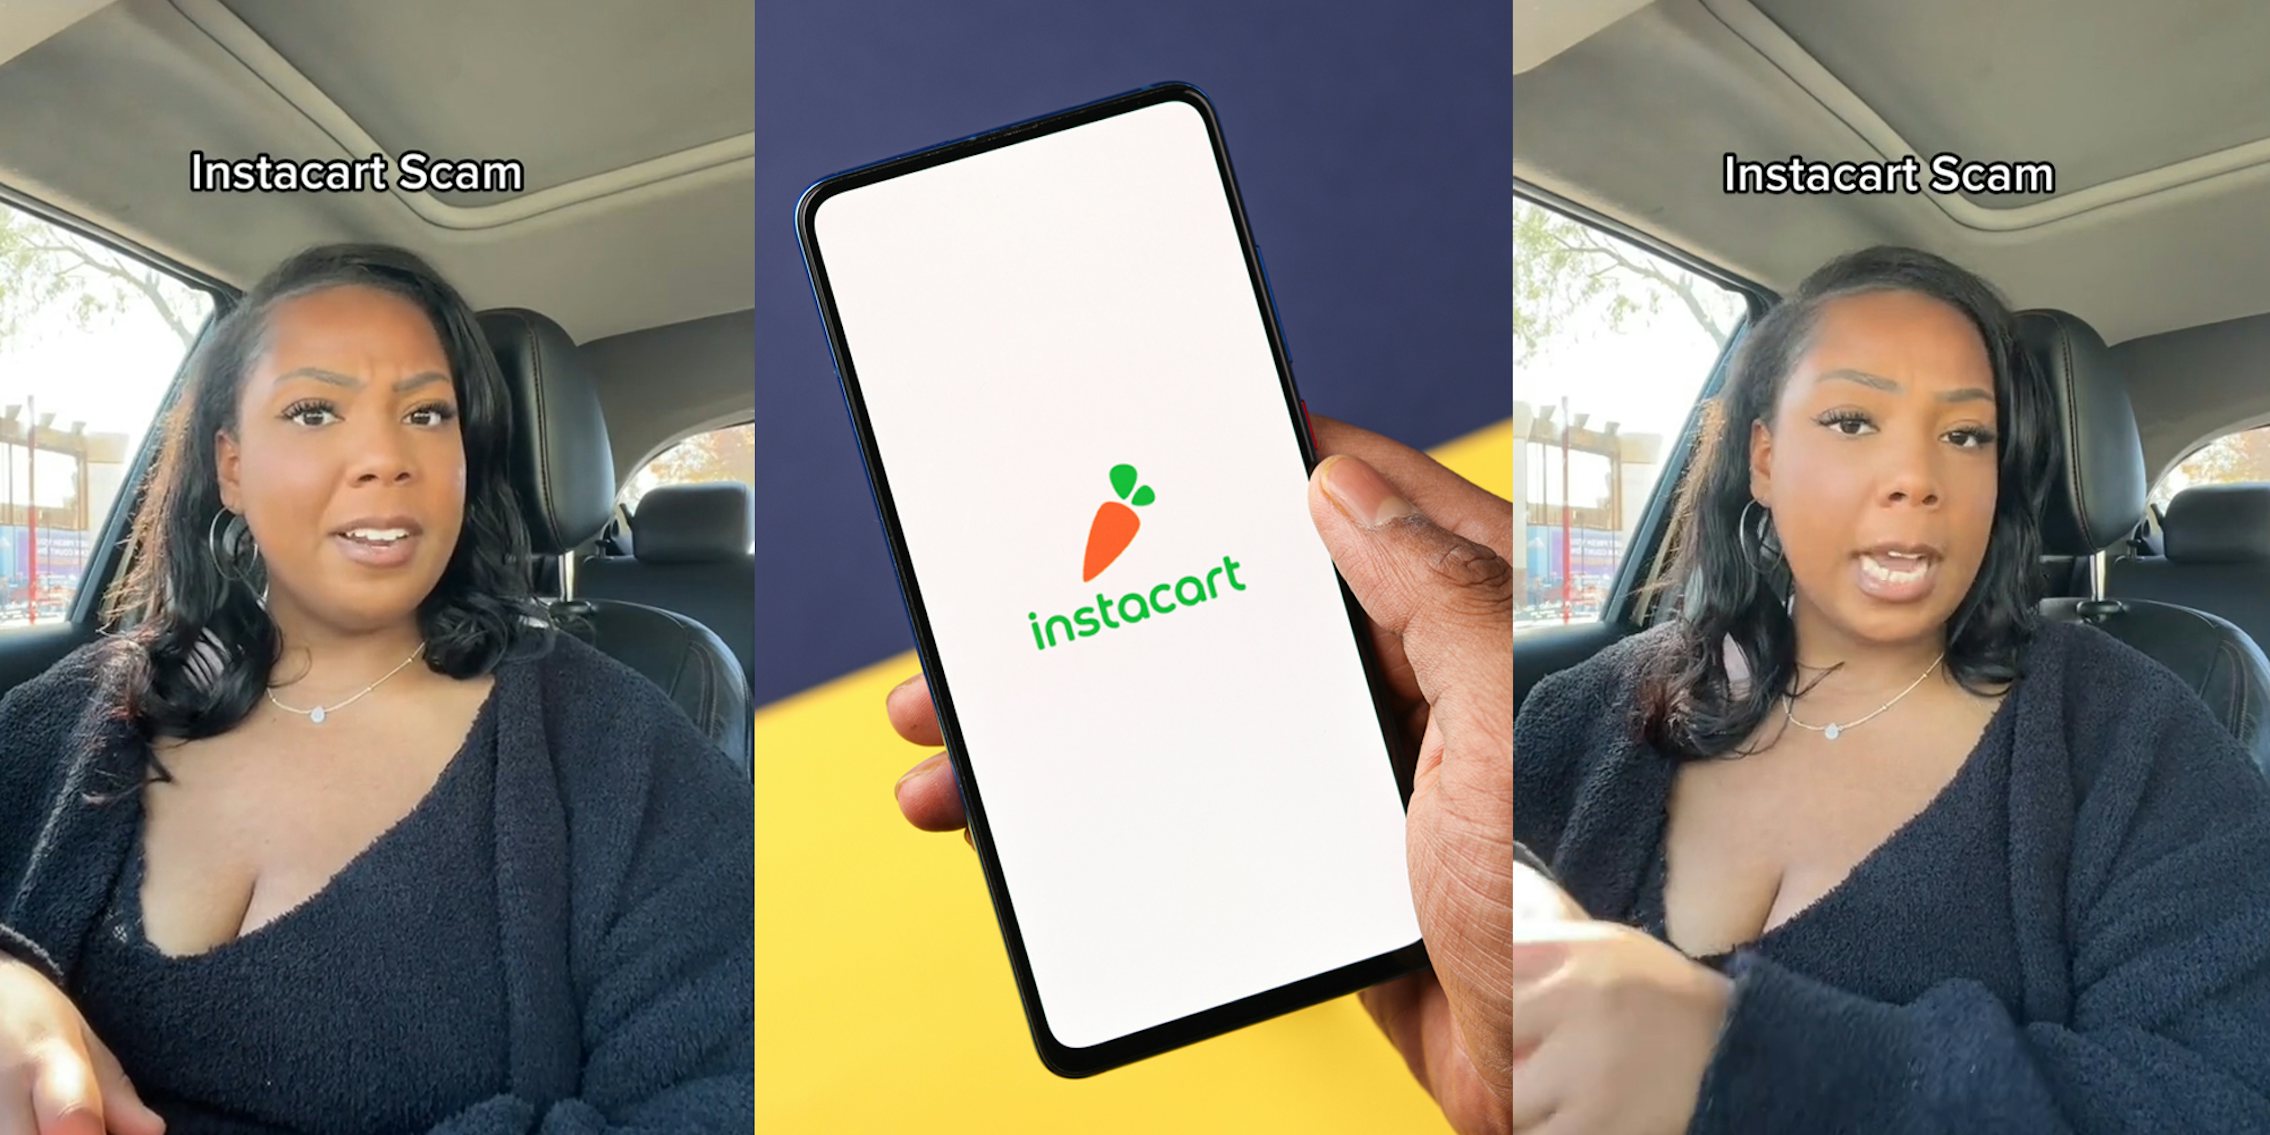 Woman speaking in car caption 'Instacart Scam' (l) Instacart on phone in hand in front of purple to yellow diagonal split background (c) Woman speaking in car caption 'Instacart Scam' (r)